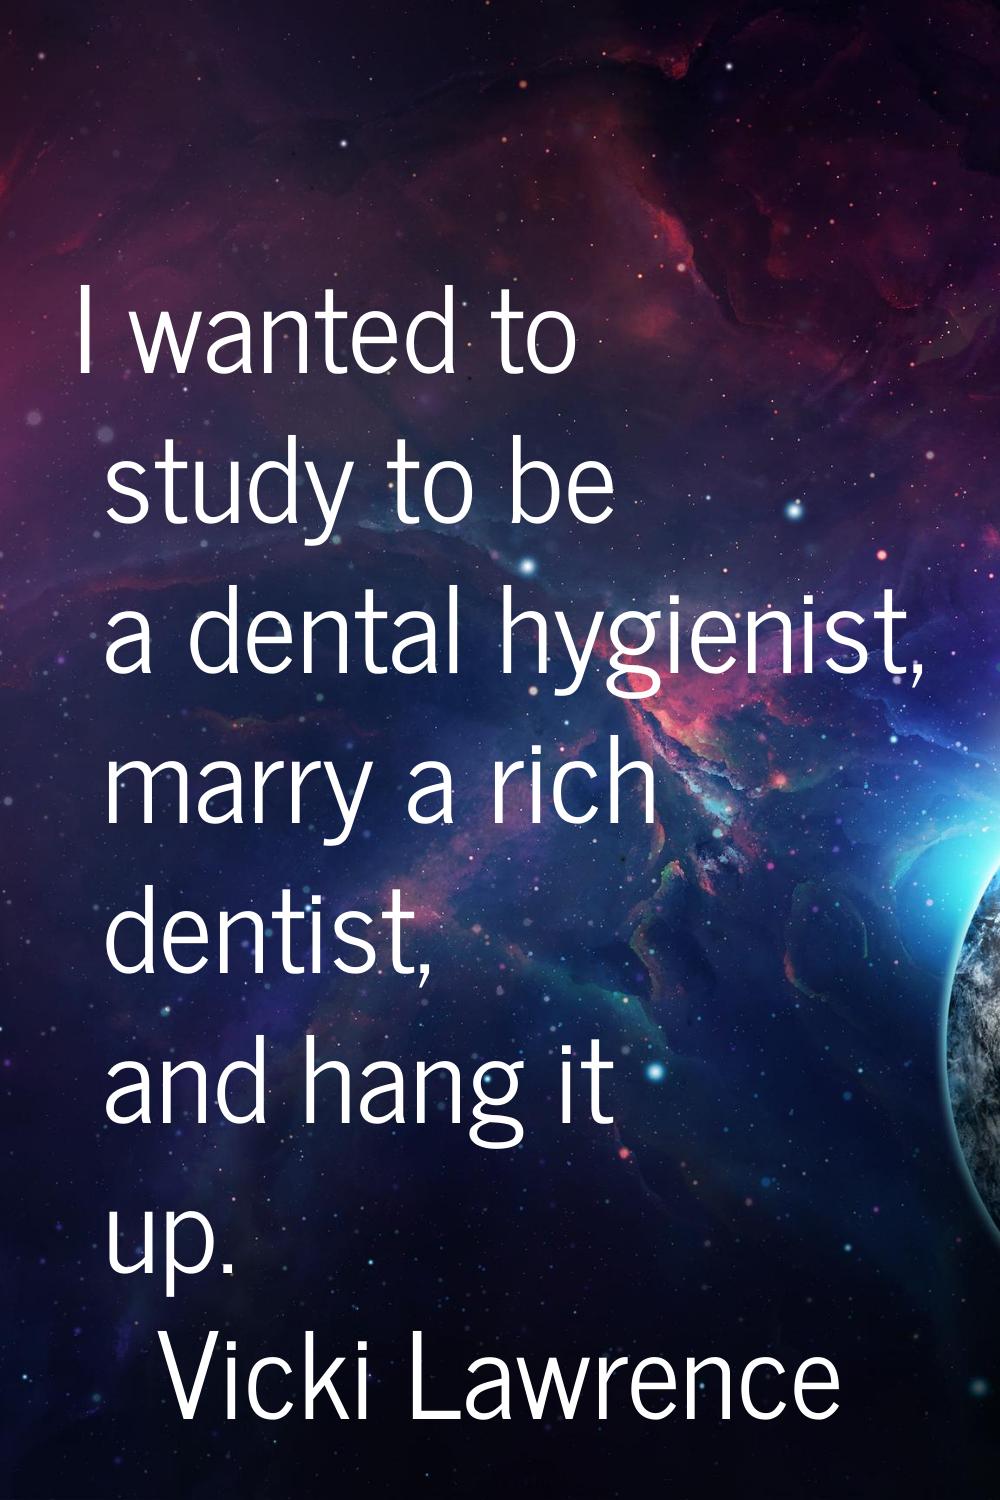 I wanted to study to be a dental hygienist, marry a rich dentist, and hang it up.